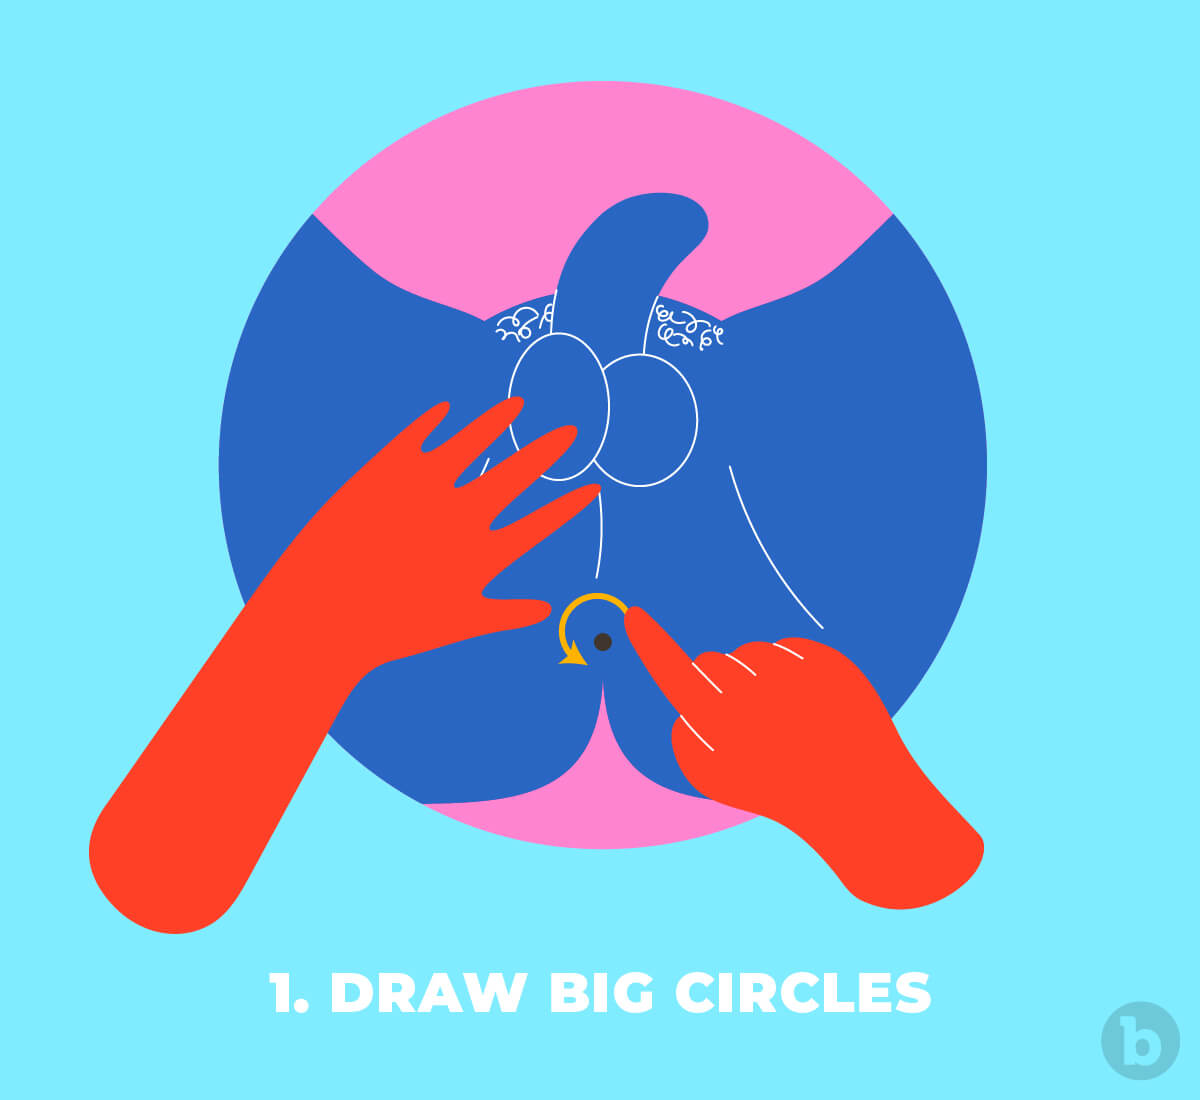 A finger making circular motions around the anus for sexual pleasure